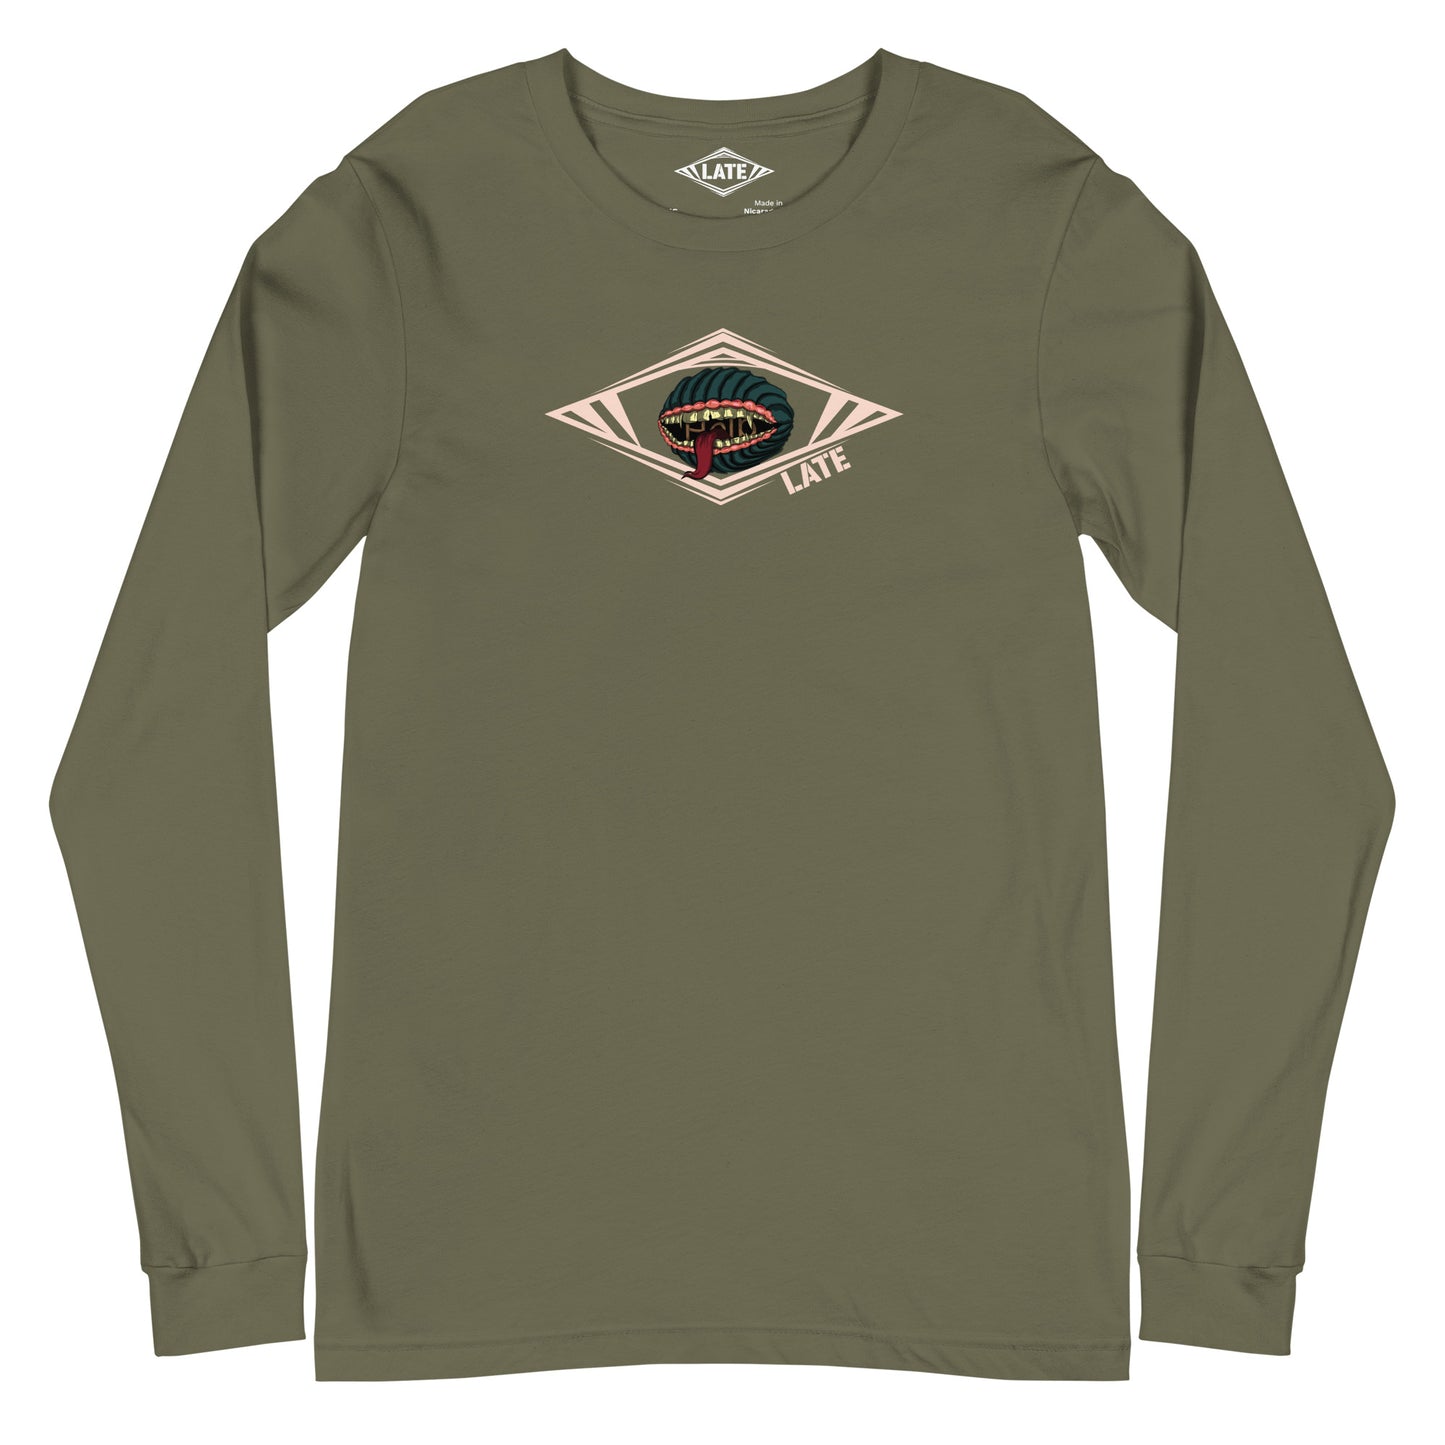 Long Sleeve Hungry volcom style plante carnivore logo Late skate unisex vert militaire